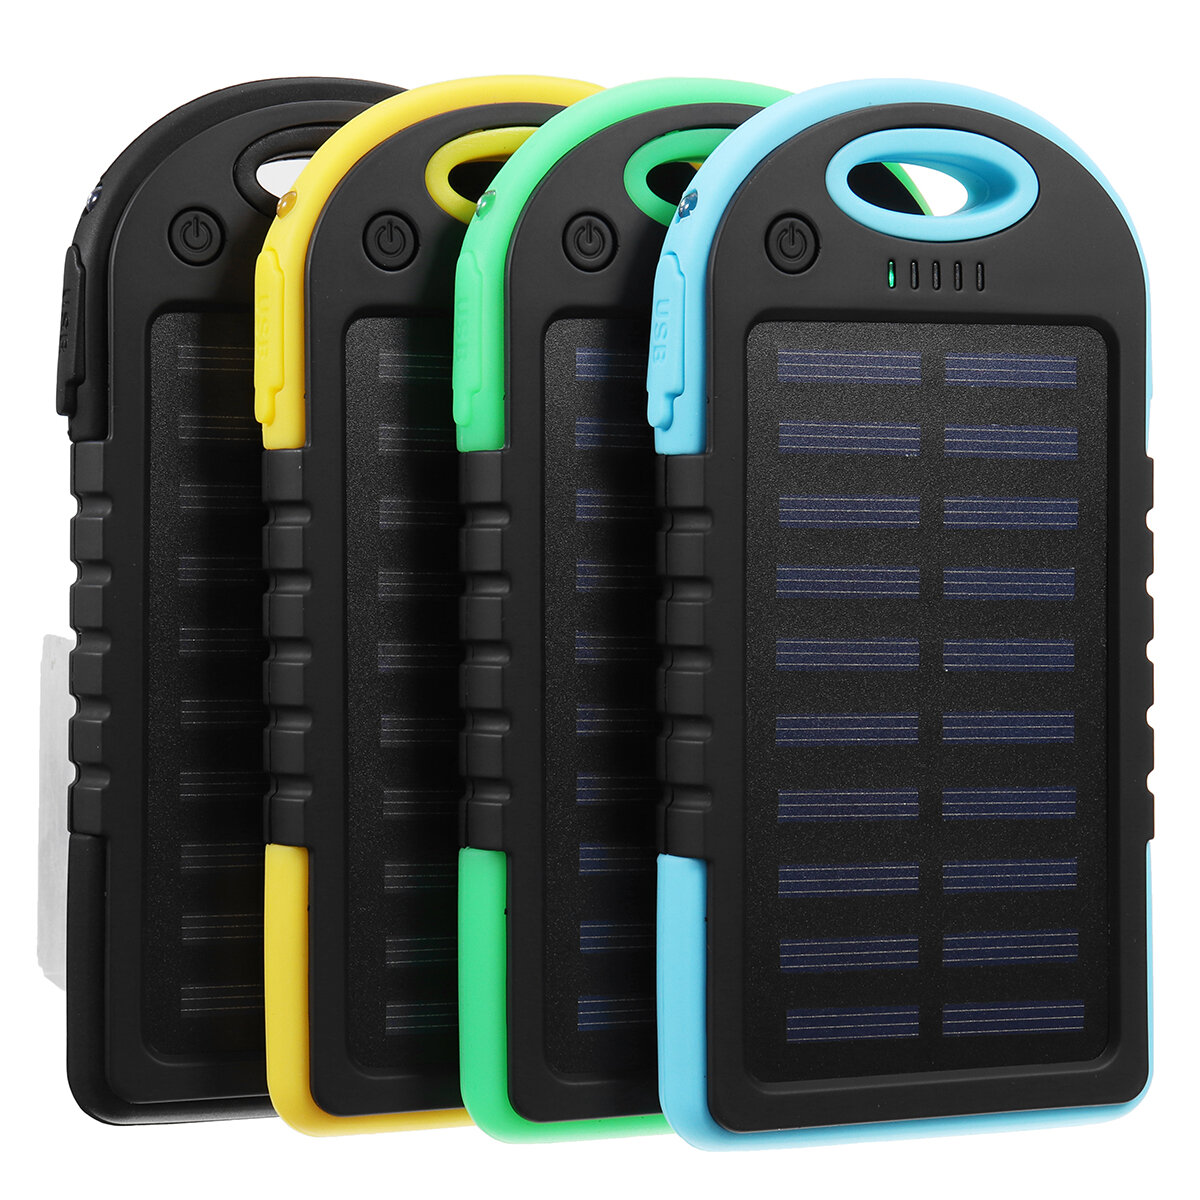 Excellway® Portable 10000mAh Solar Powered System Charger USB Battery Charger Case for Camping Outdoor